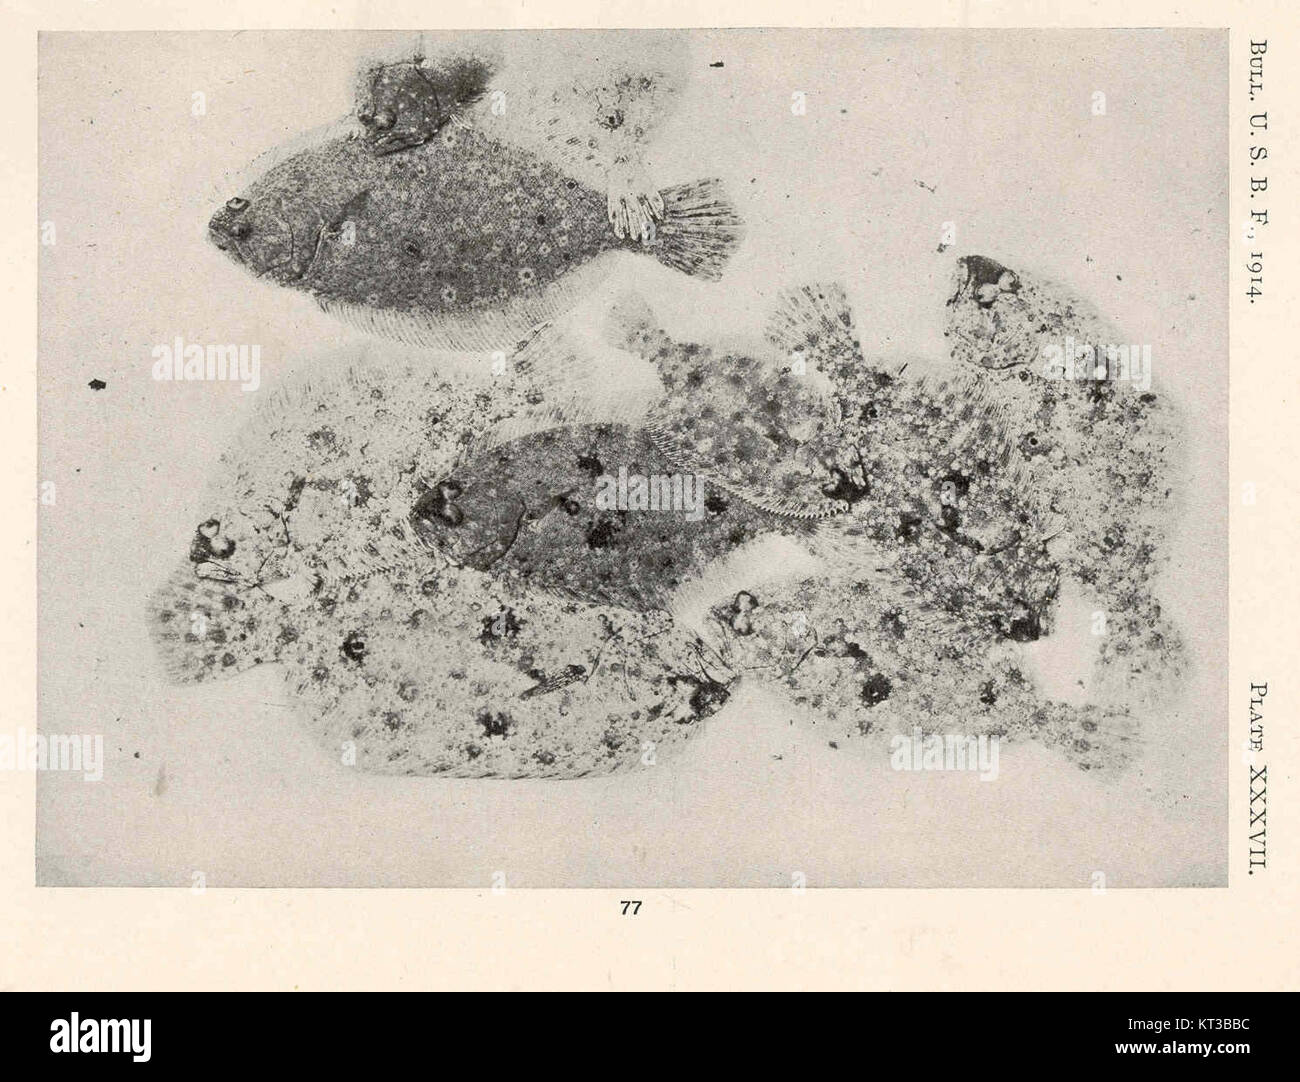 40261 Paralichthys Group of Paralichthys on a white background containing considerable debris scattered over it All of the specimens Stock Photo